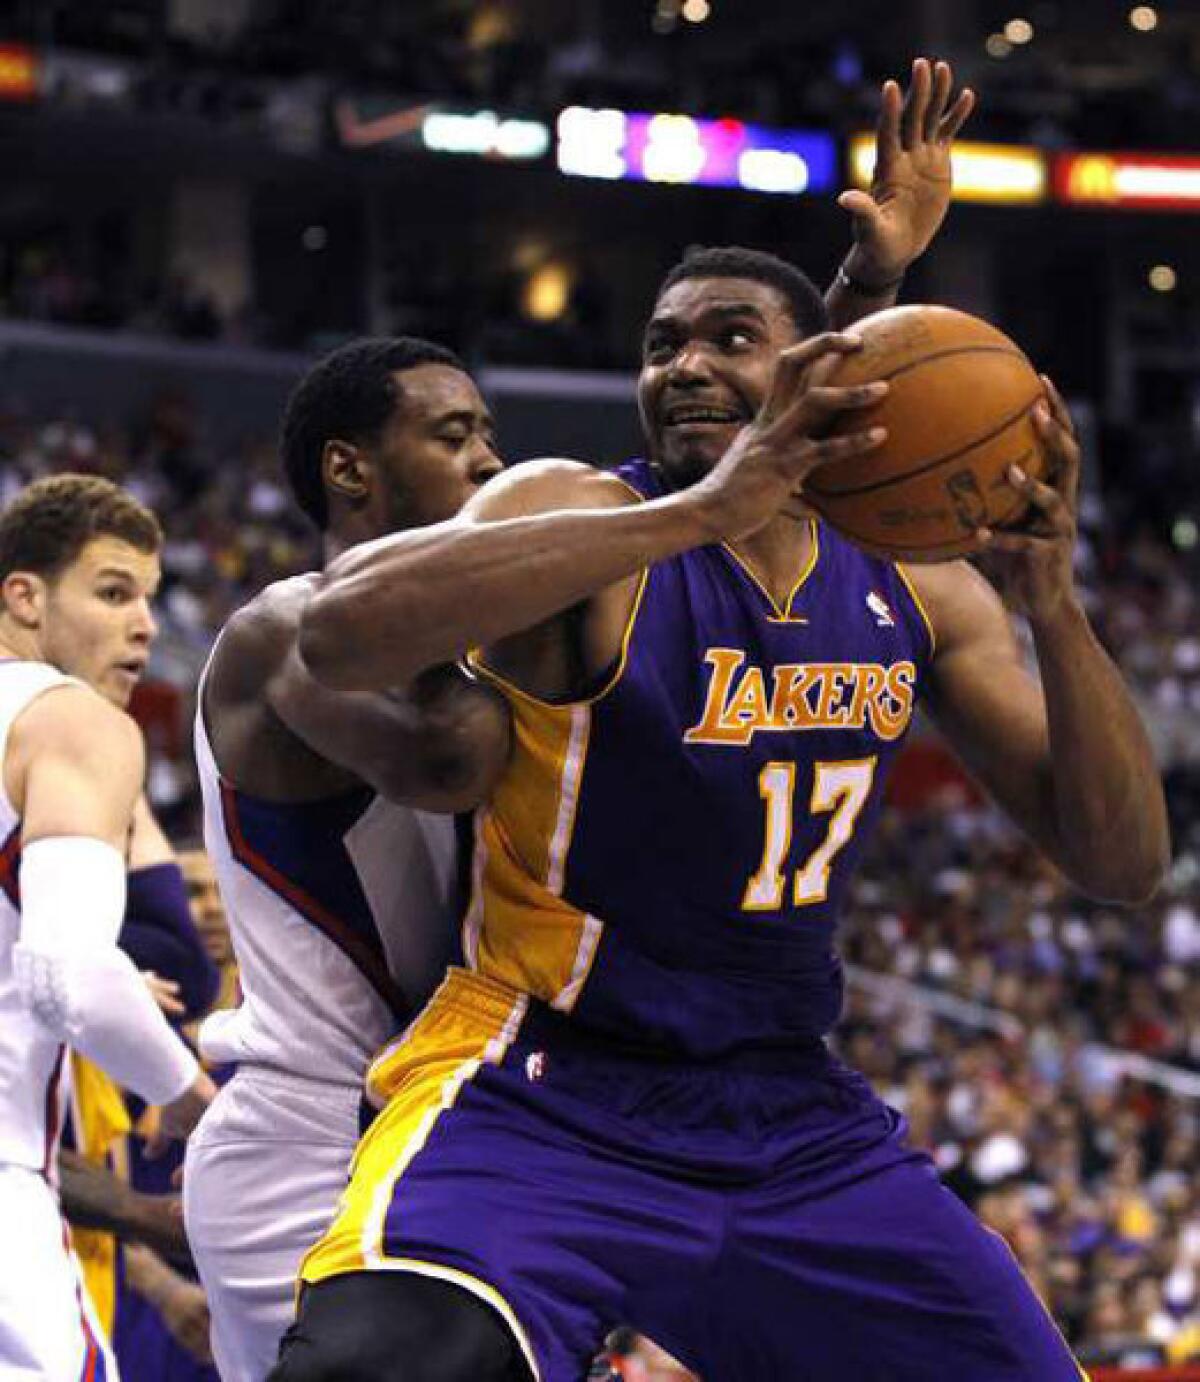 Andrew Bynum provided plenty of memorable moments during his seven seasons with the Lakers.